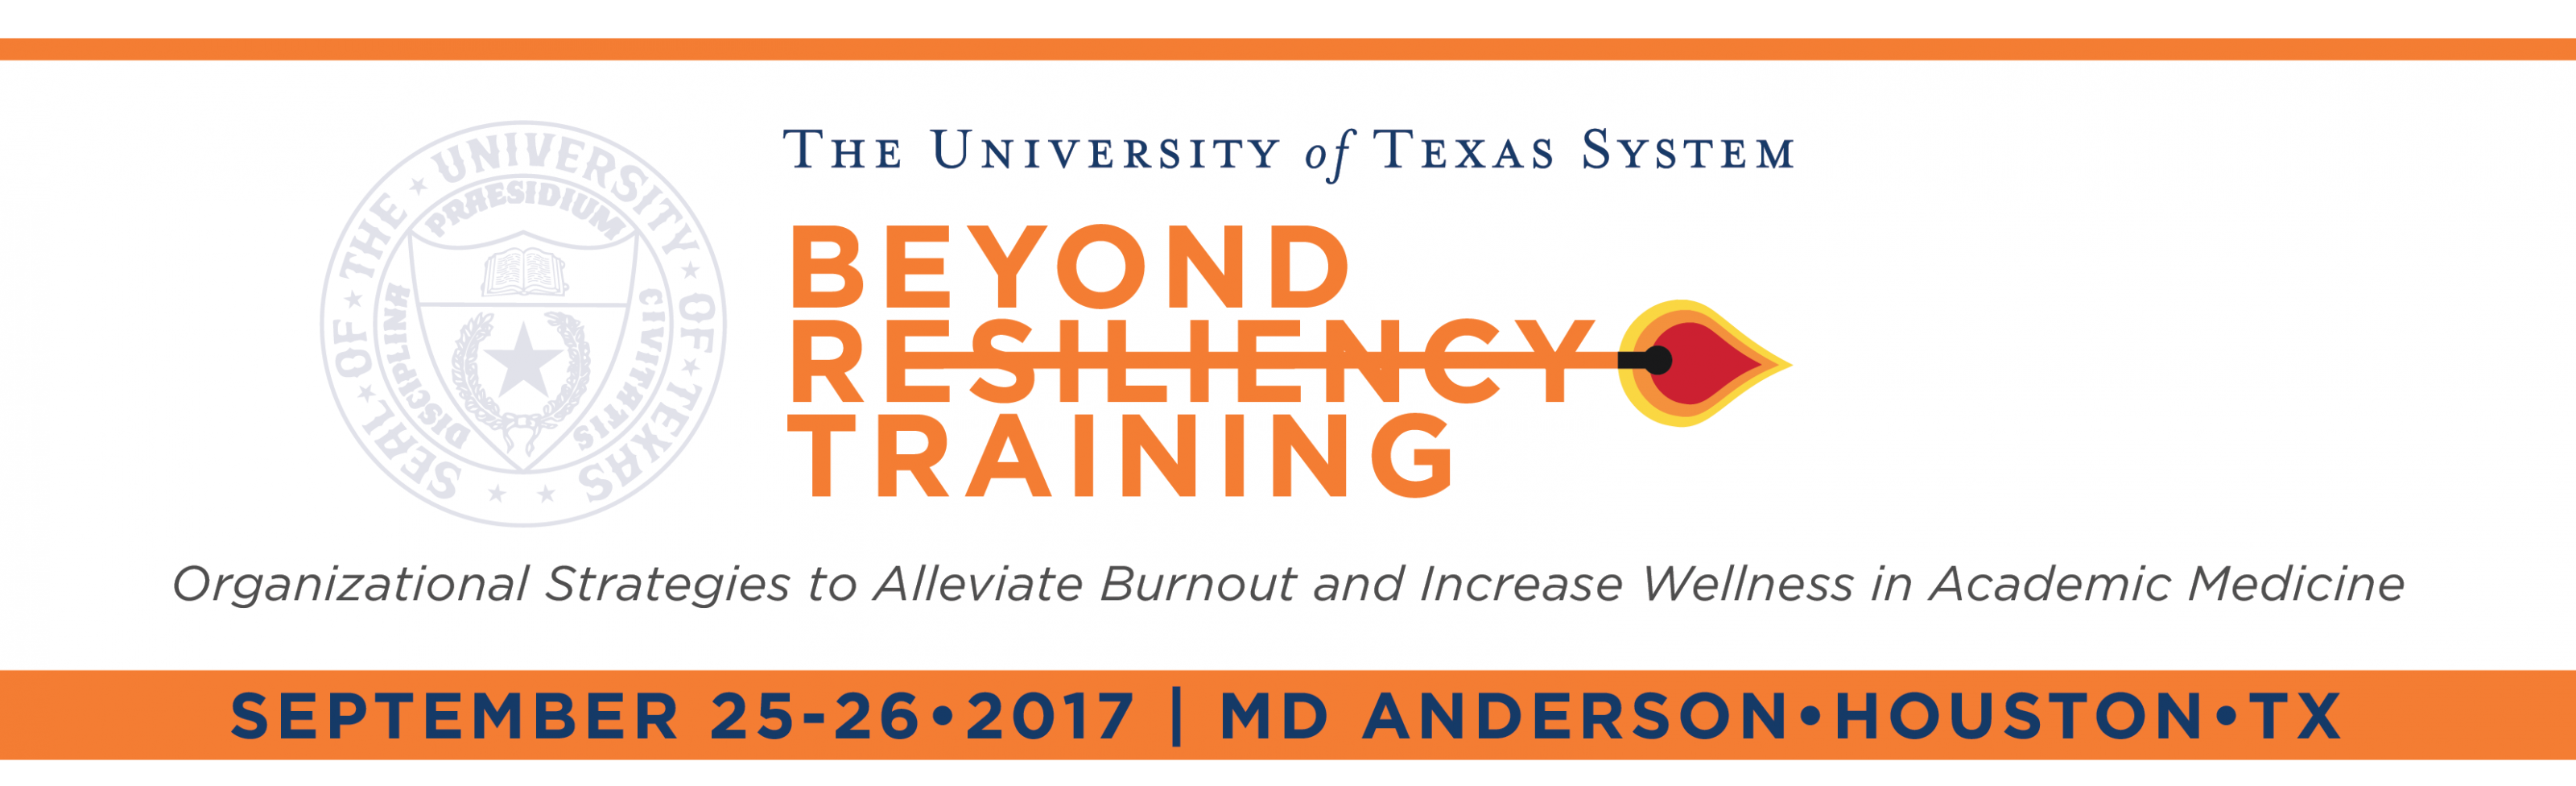 UT System Beyond Resiliency Training. Organizational Strategires to Alleviate Burnout and Increase Wellness in Academic Medicine